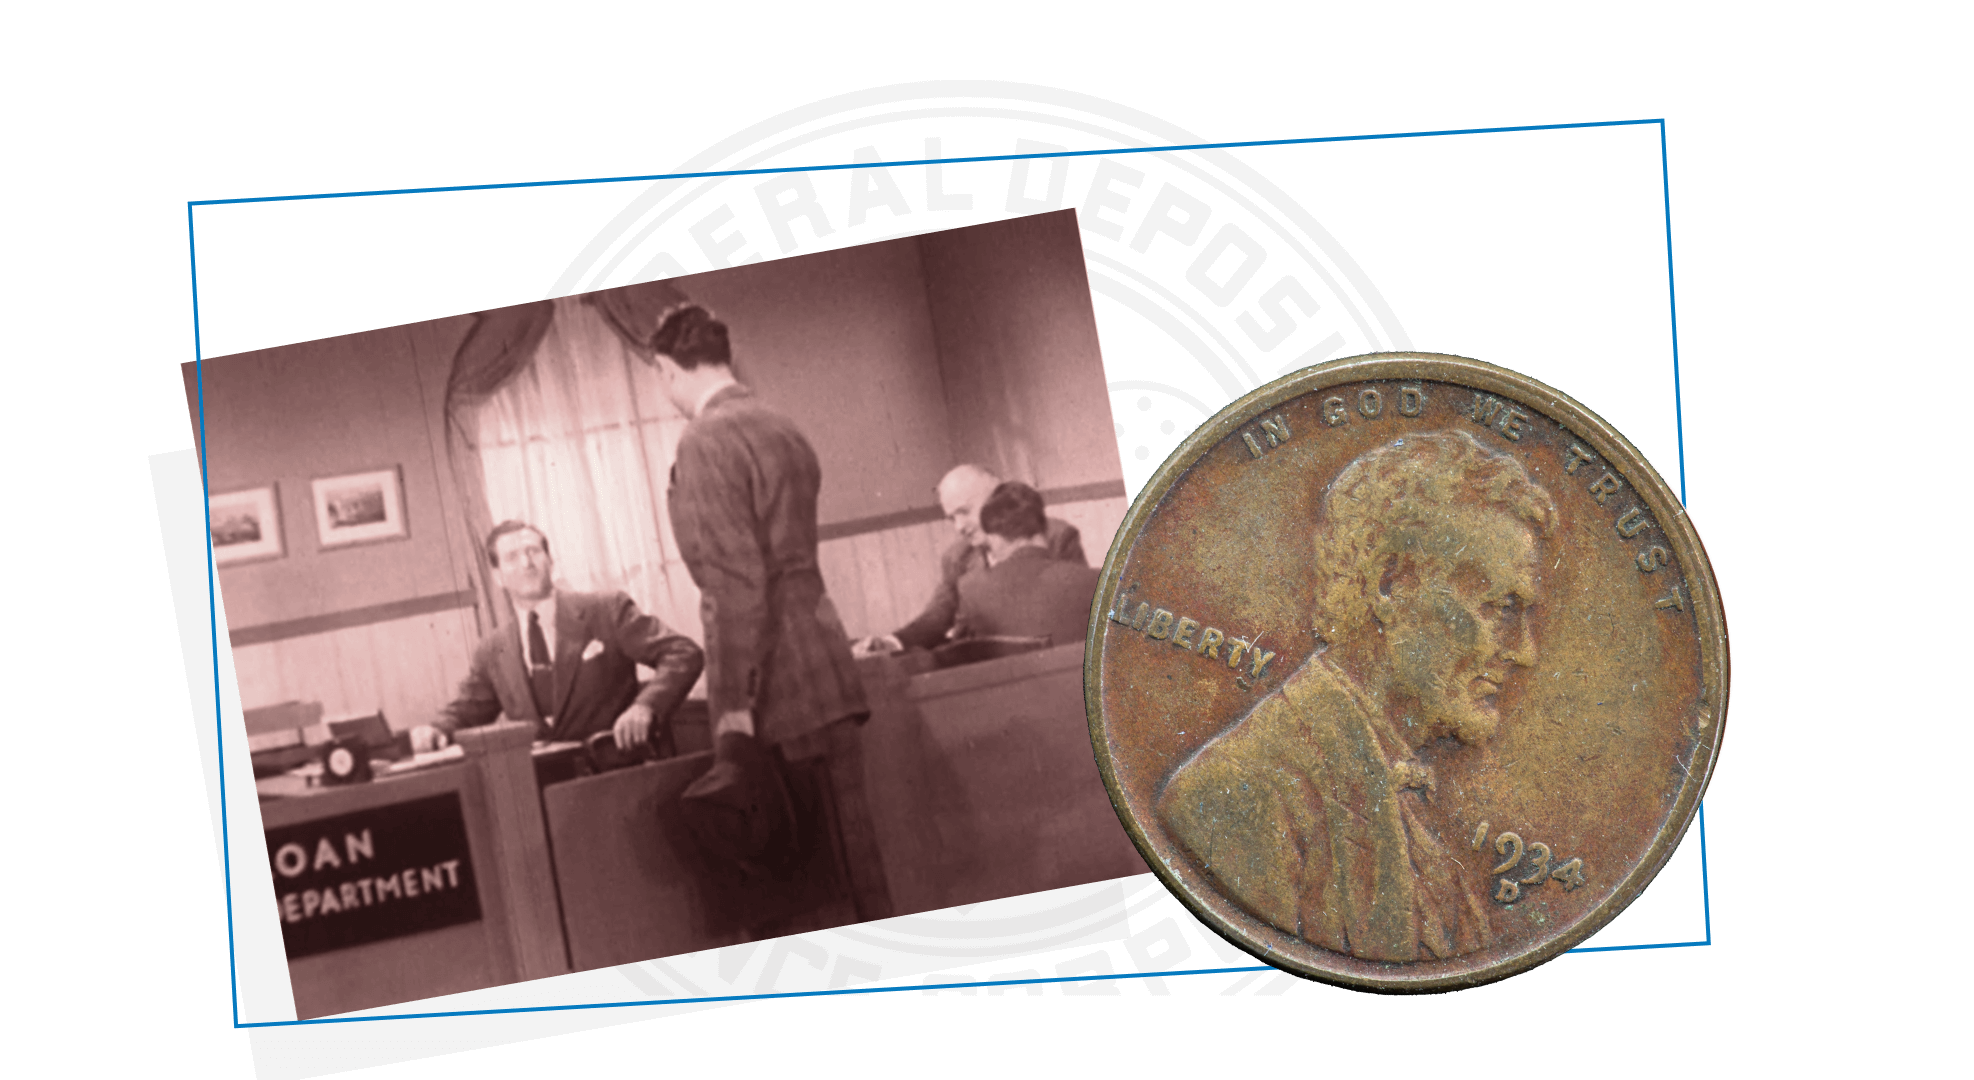 Bank Teller and Penny image